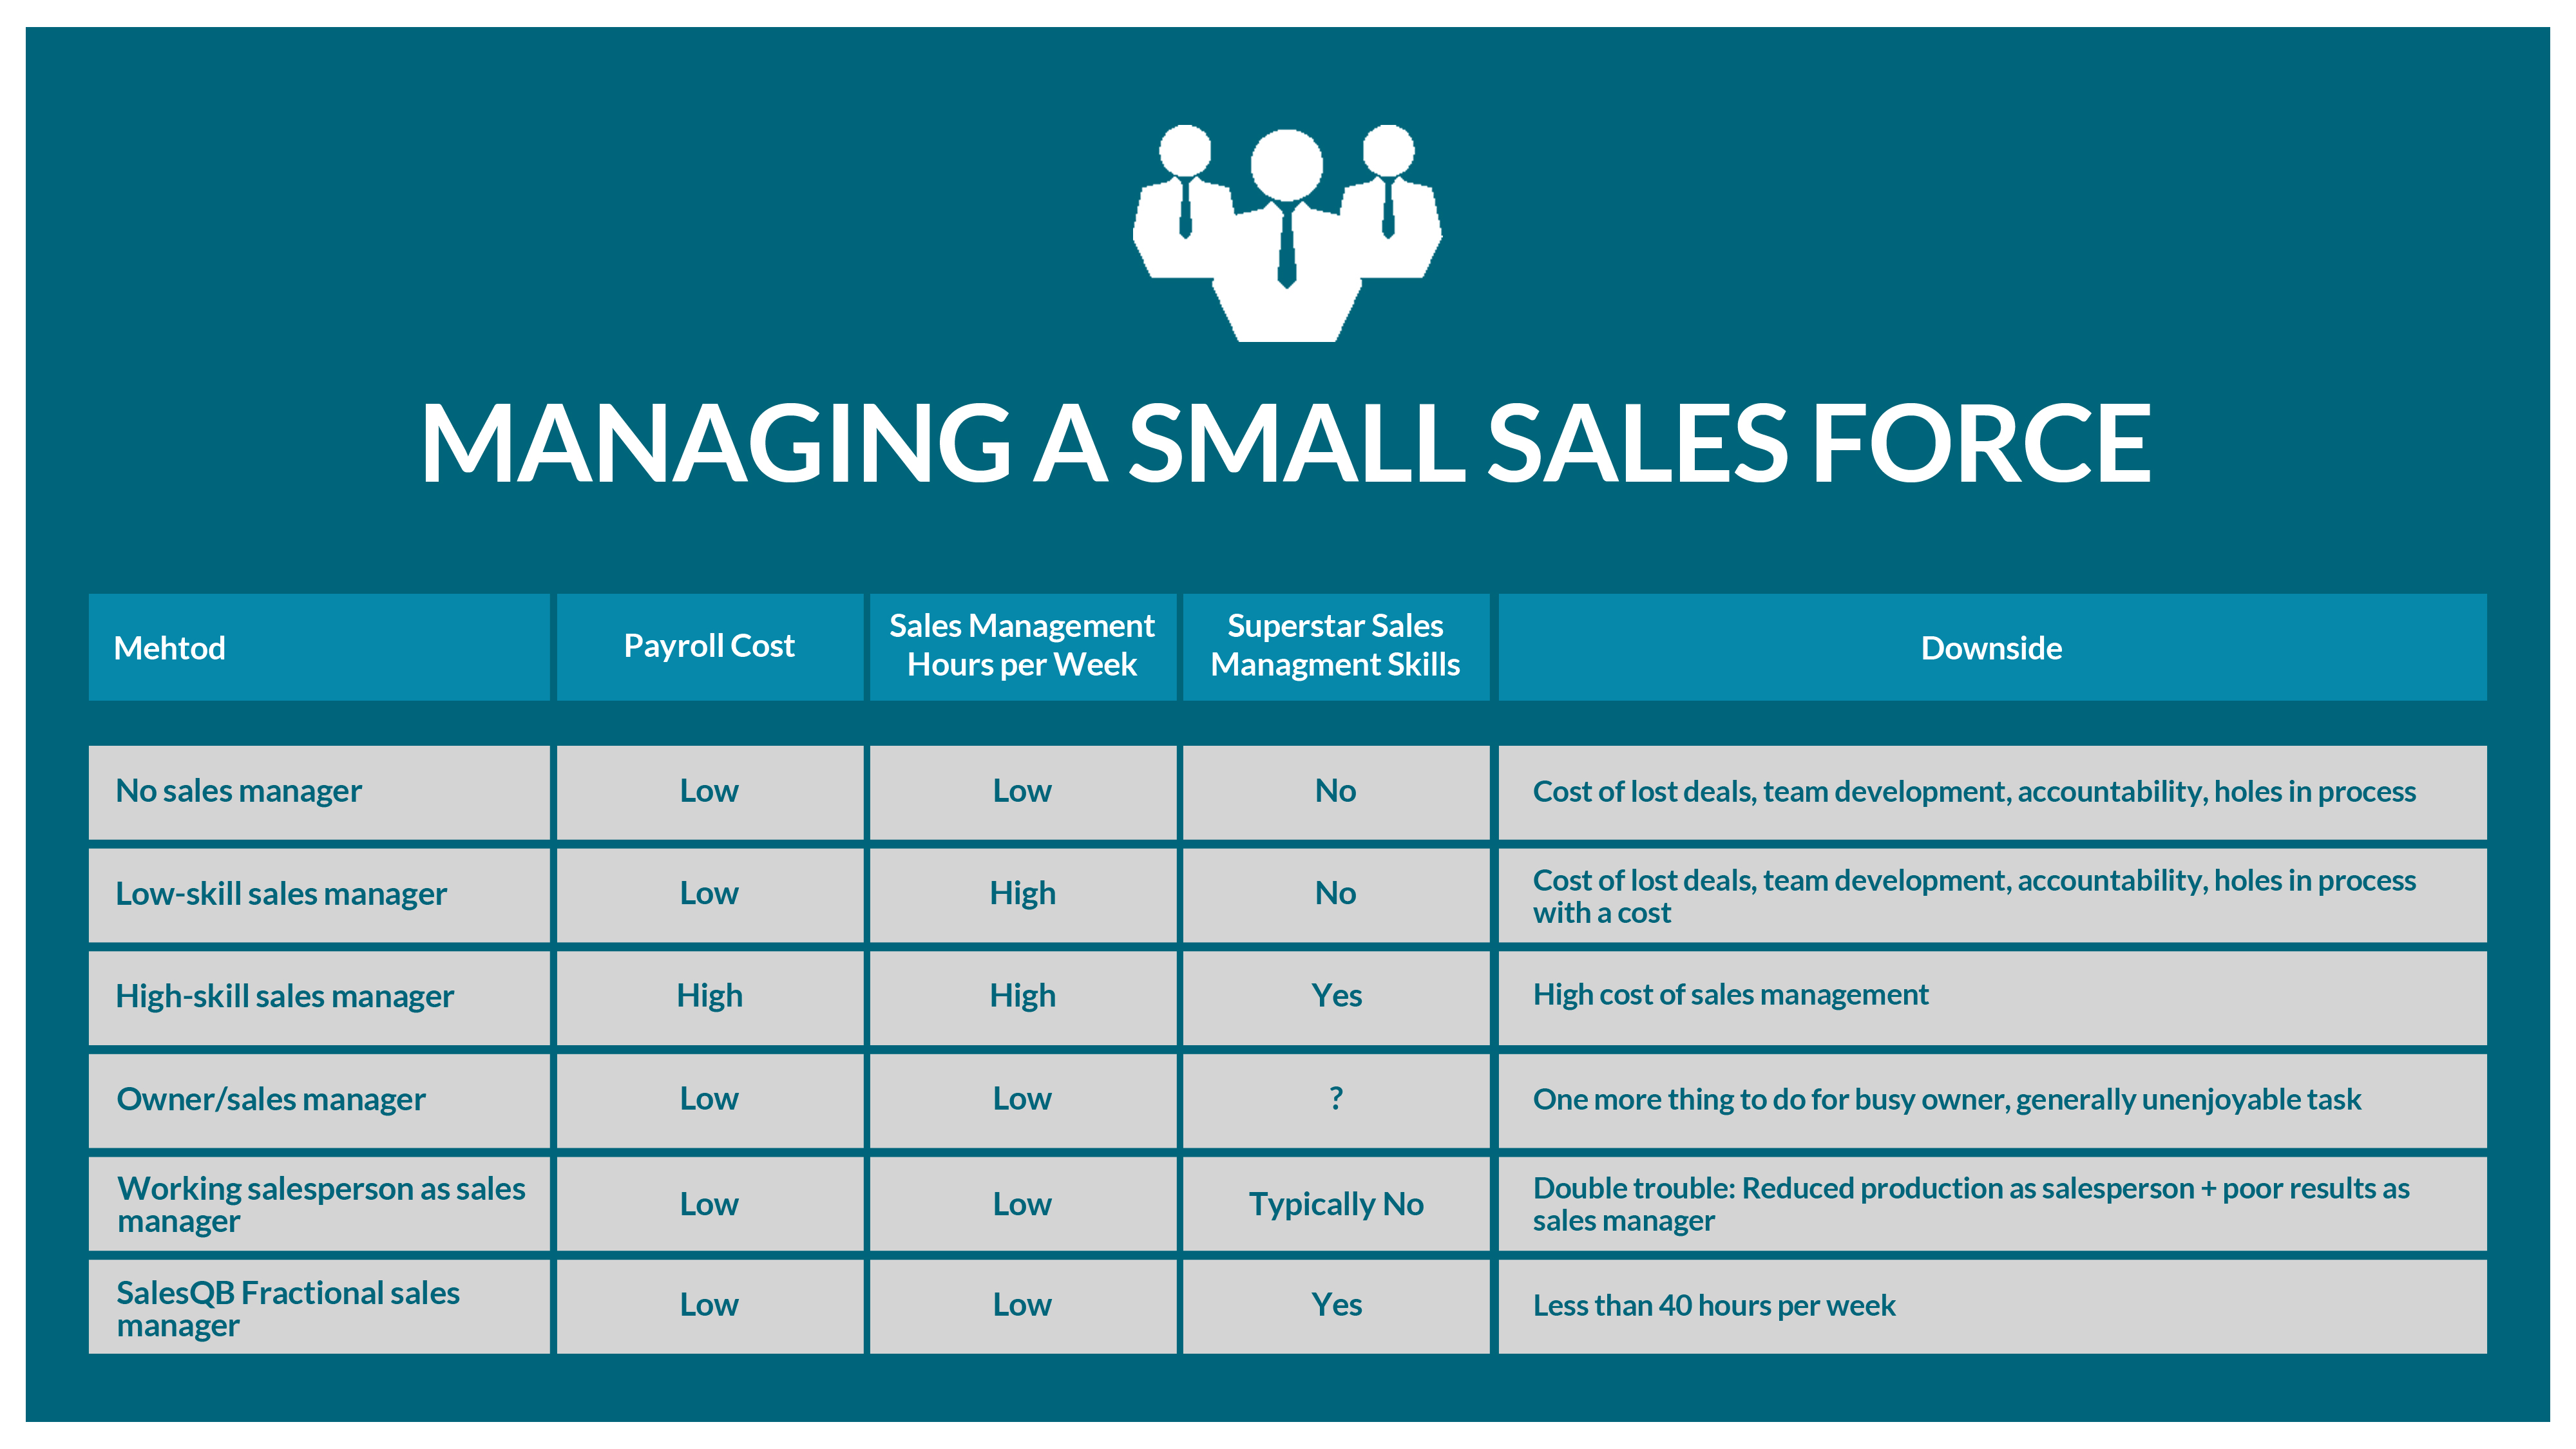 Methods to Manage a Small Sales Force